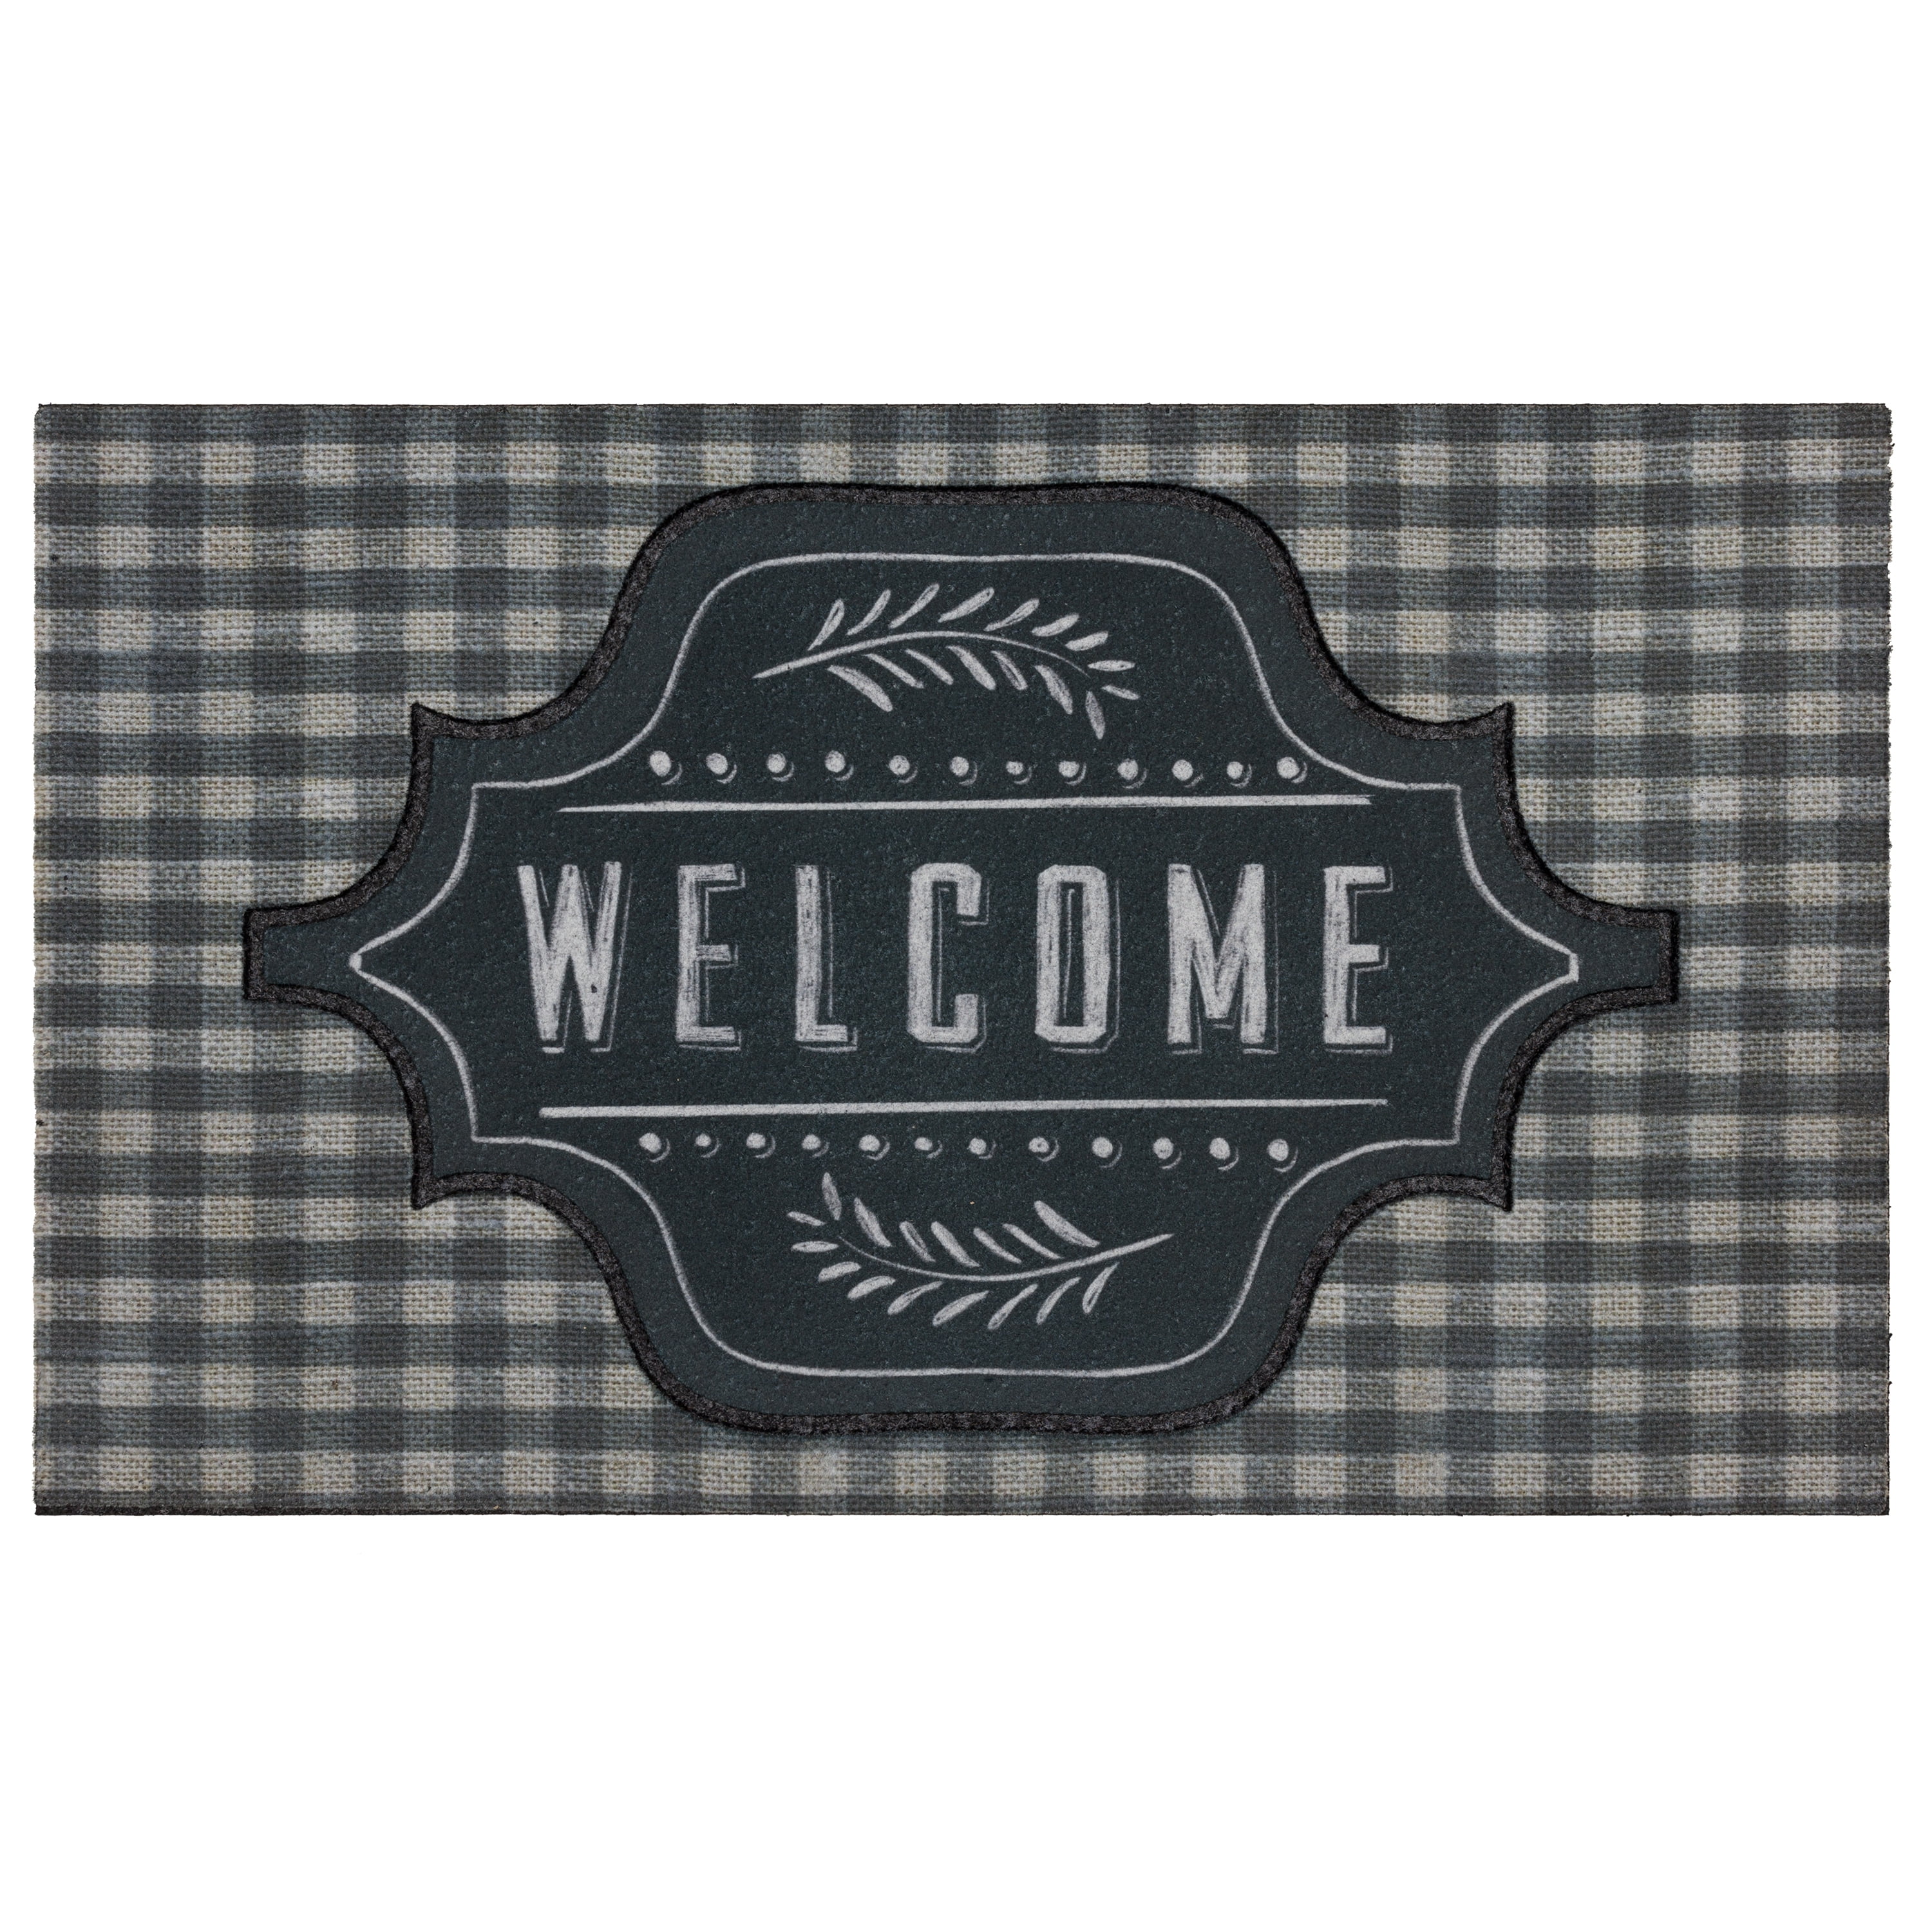 Briarwood Lane Red Checkered Welcome Coir Doormat Natural Fiber Black and Red Plaid 18 x 30 